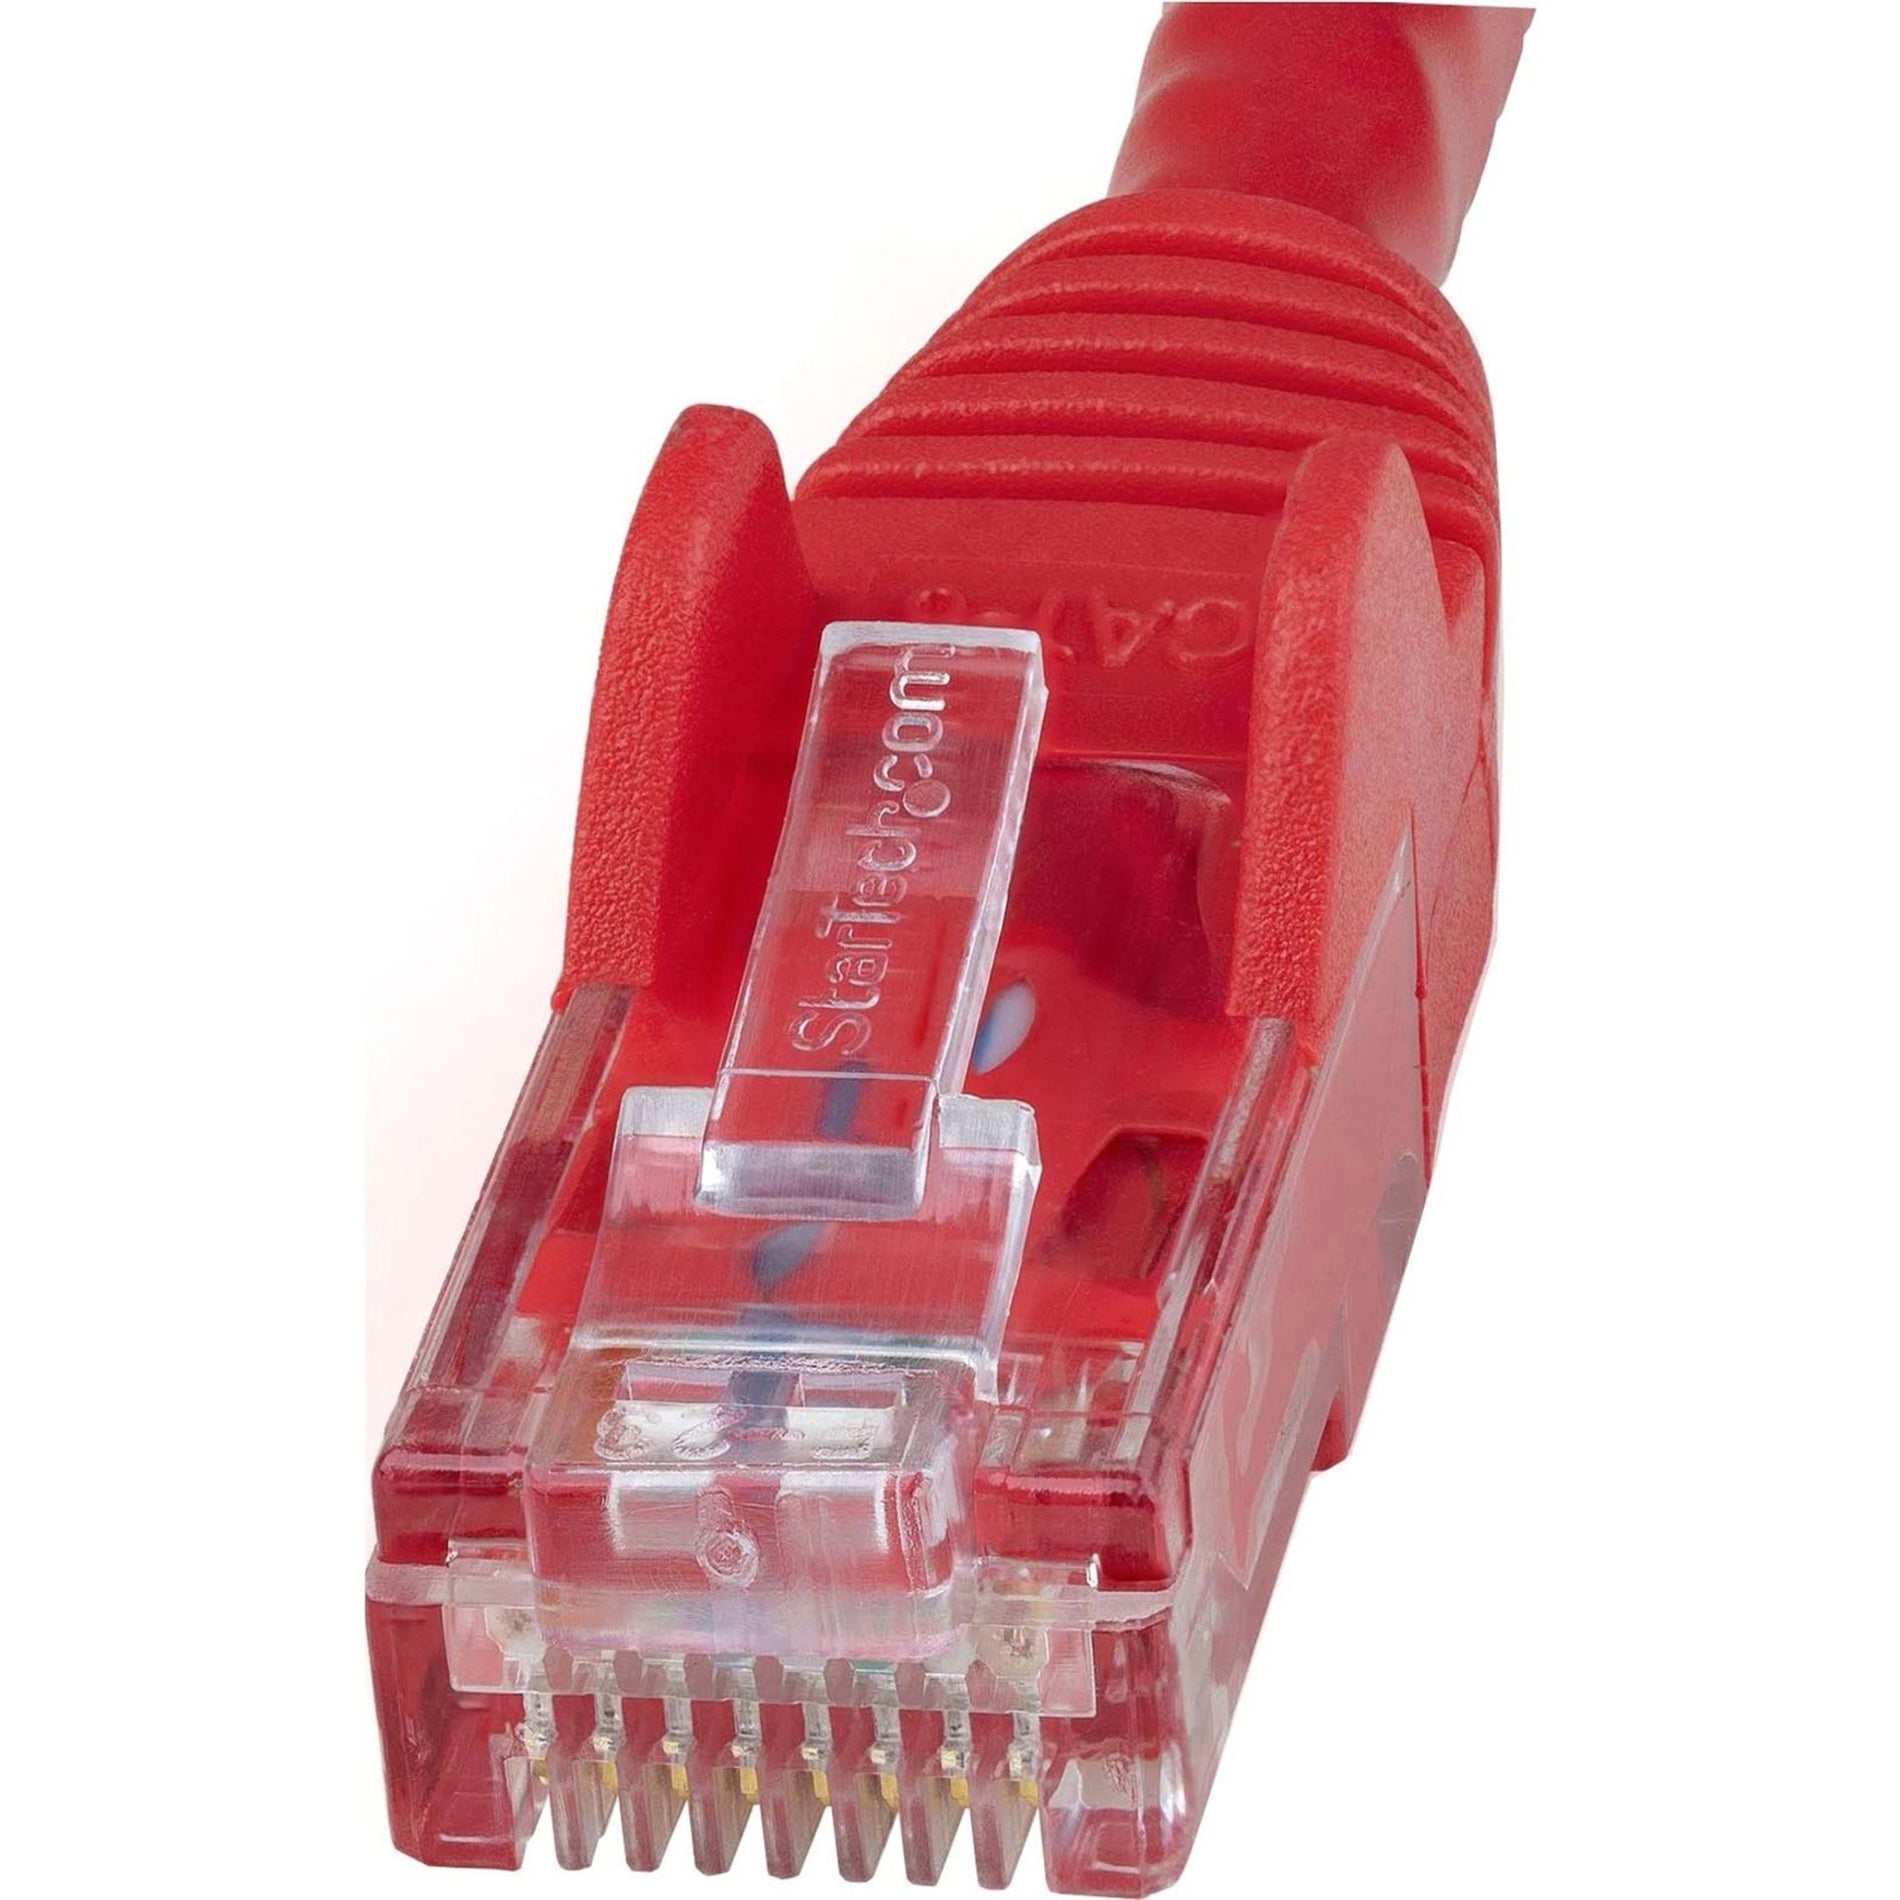 StarTech.com N6PATCH35RD 35 ft Red Snagless Cat6 UTP Patch Cable, Lifetime Warranty, 10 Gbit/s Data Transfer Rate, Gold Connectors